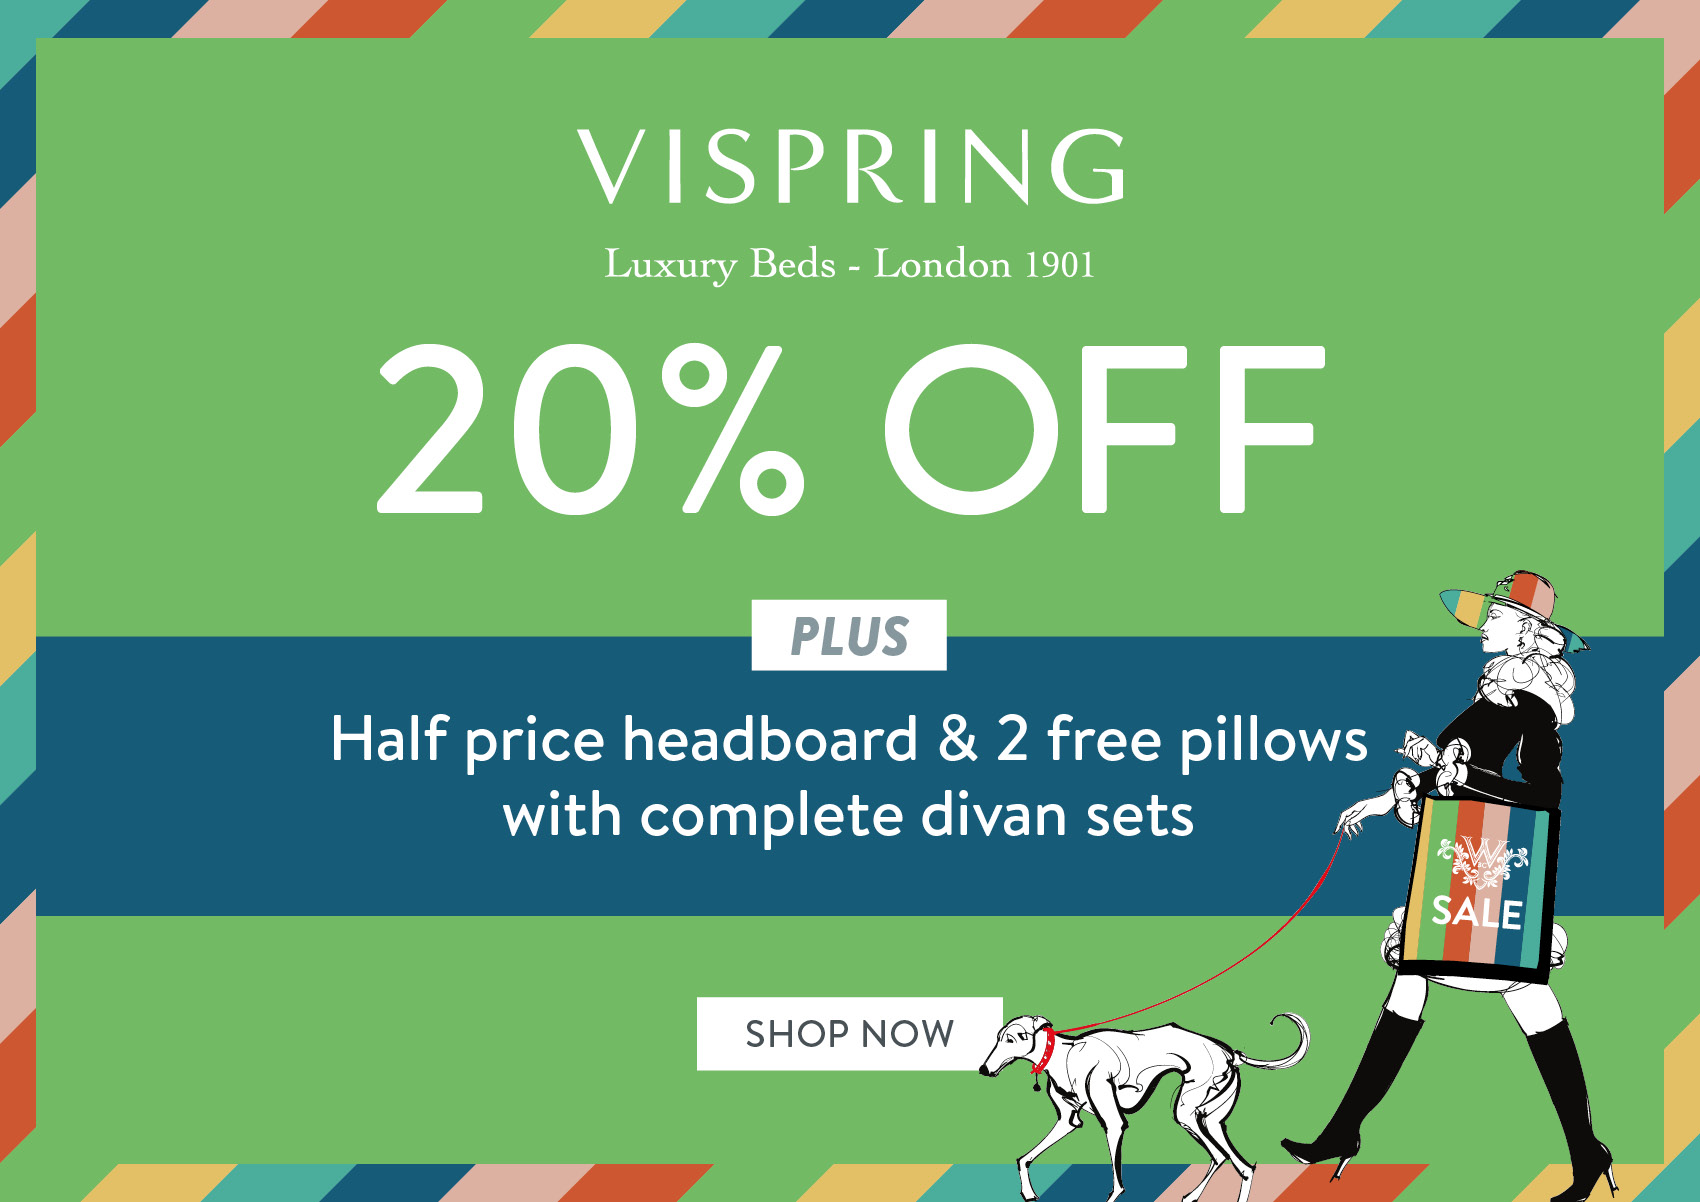 VISPRING Luxury Beds - London 1901 - 20% OFF - PLUS Half price headboard % 2 free pillows with complete divan sets